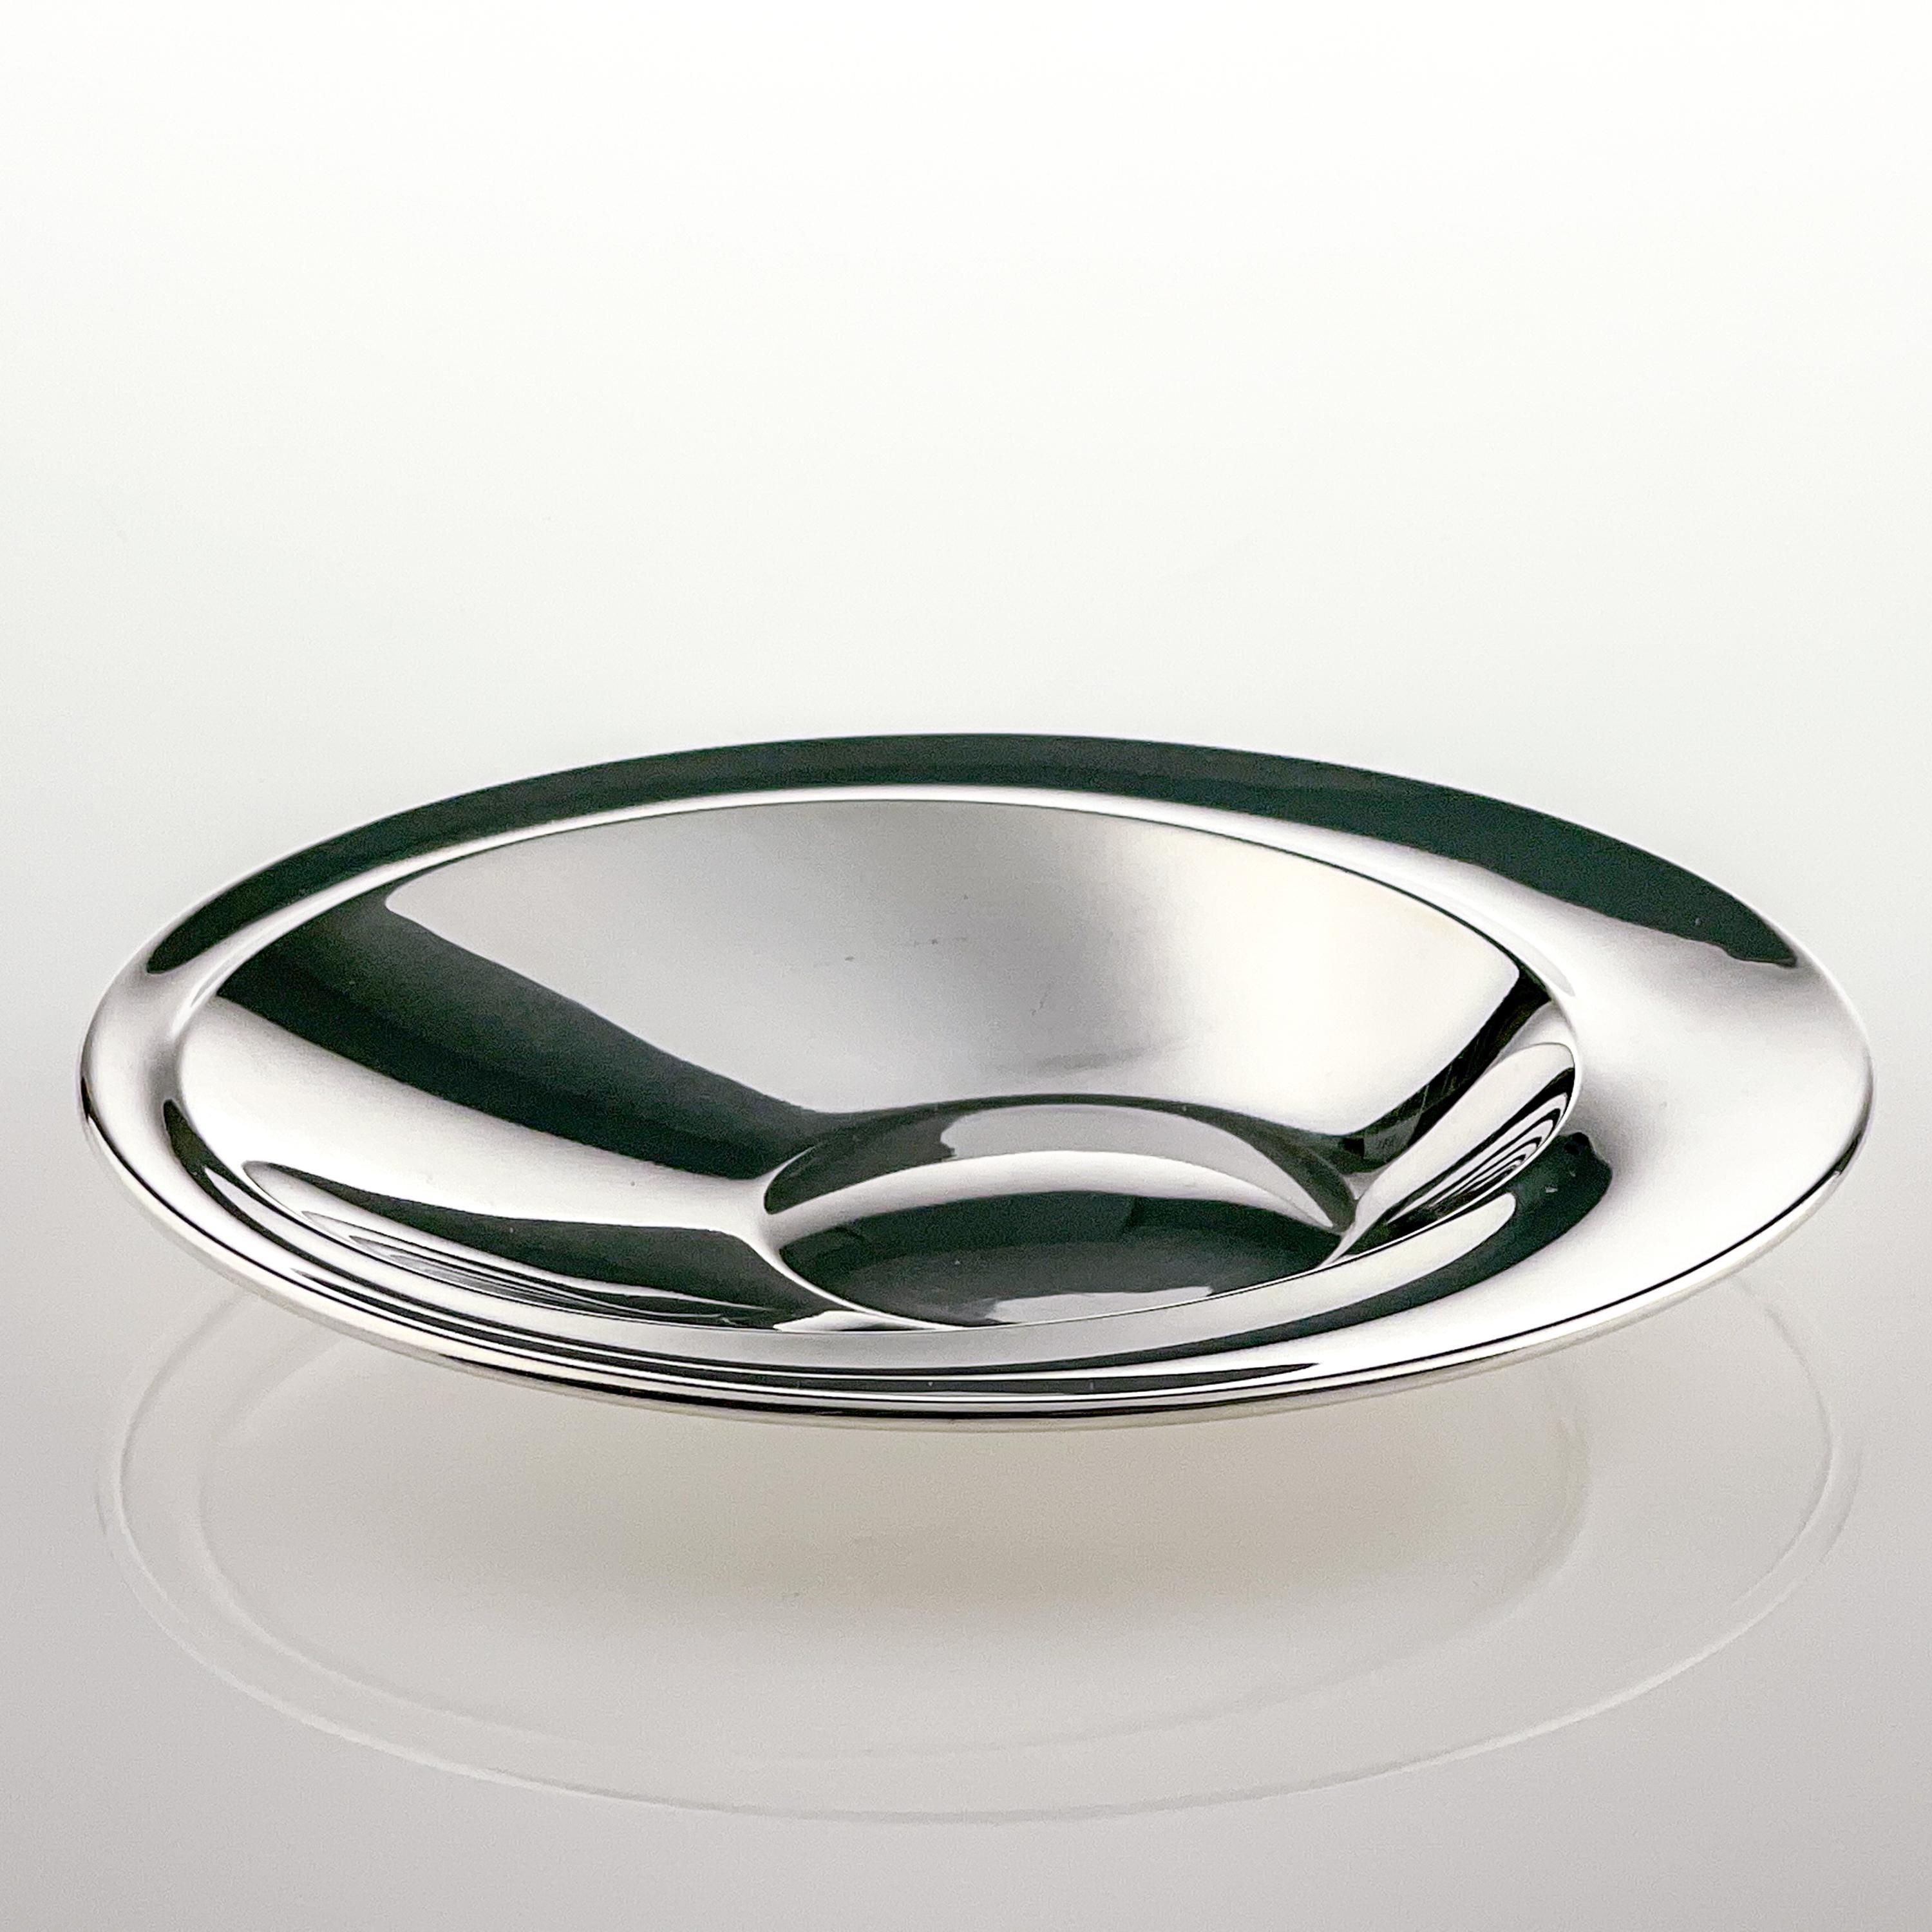 Tapio Wirkkala, A Silver Dish, Model TW 117, Kultakeskus, Finland, 1978

Artist
Tapio Wirkkala (1915 Hanko, Finland - 1985 Helsinki, Finland) A giant of Finnish design, Wirkkala was an artist of great diversity for whom no material was alien and